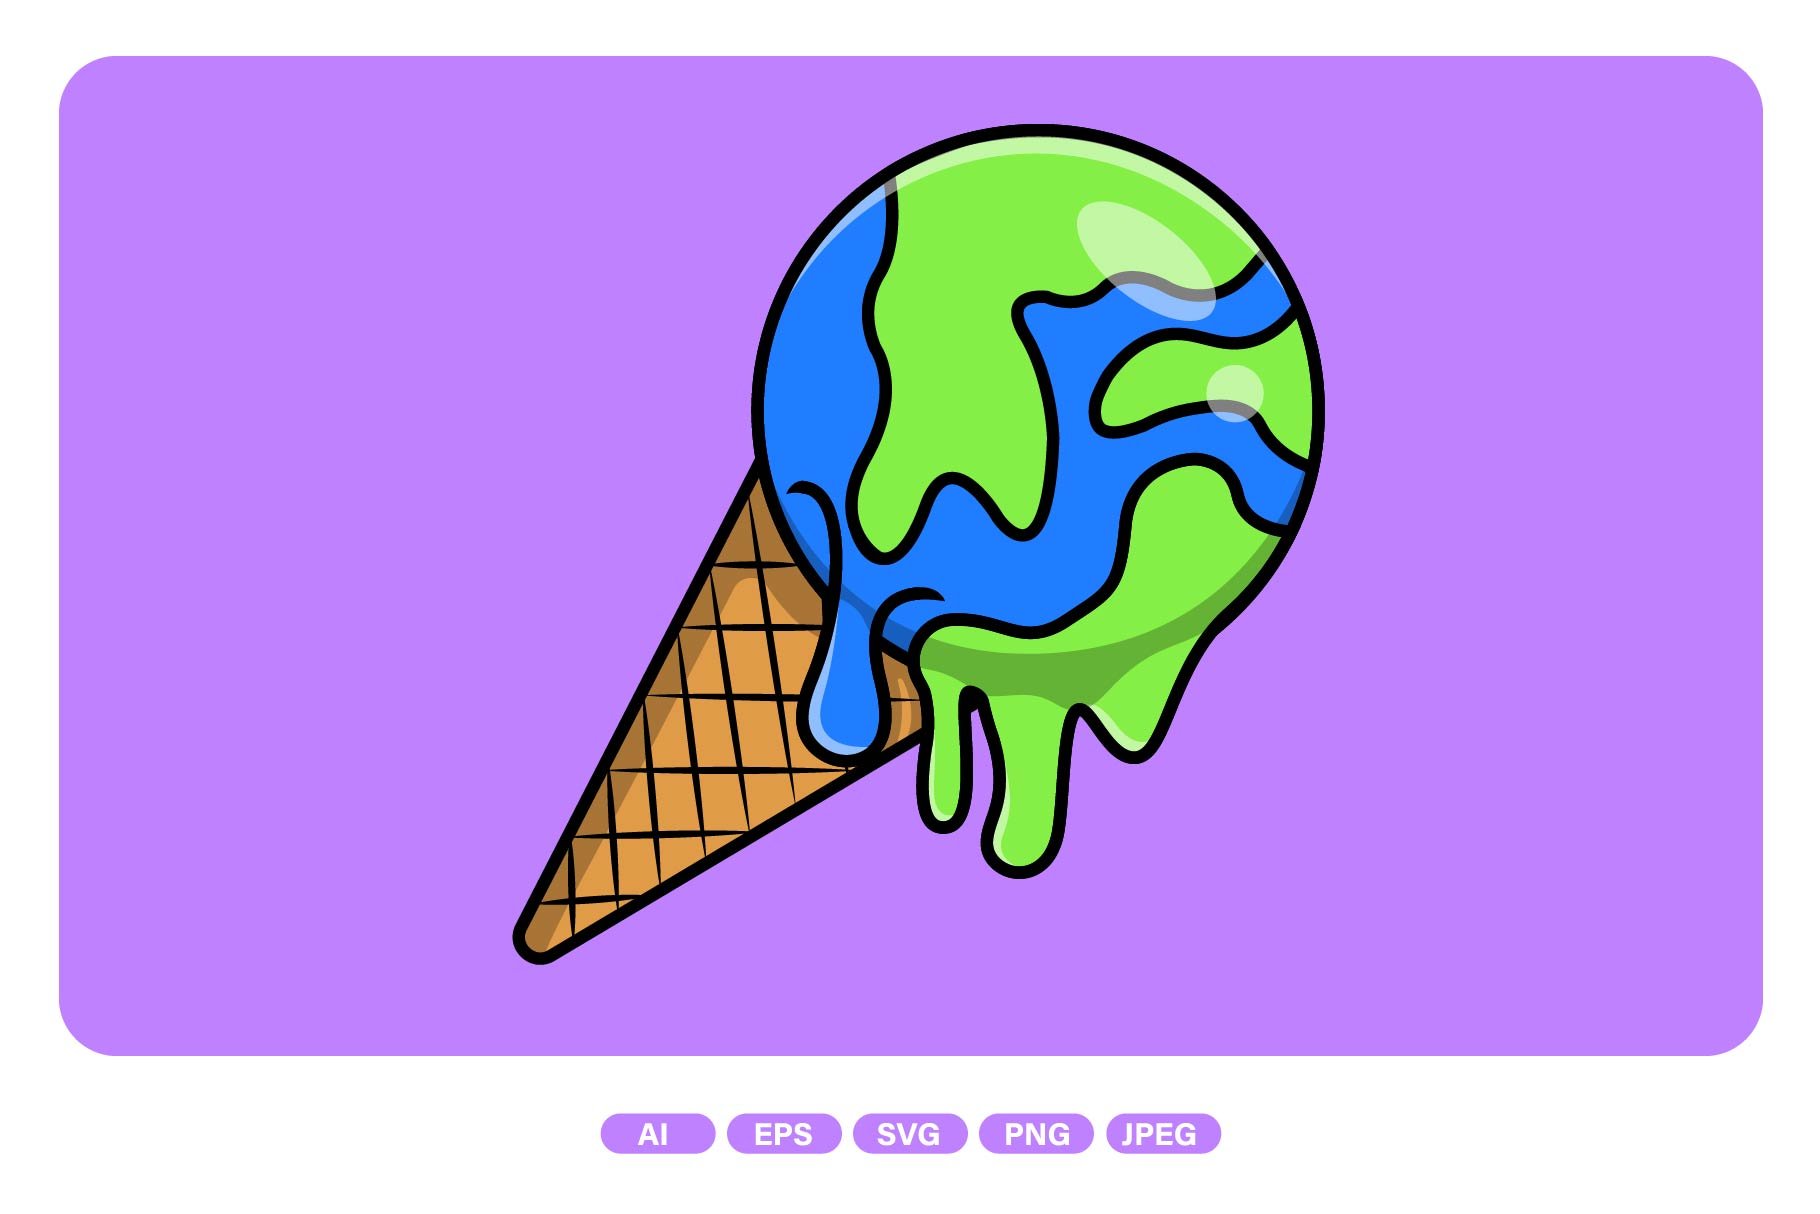 Ice Cream Earth Drip Melted Cartoon cover image.